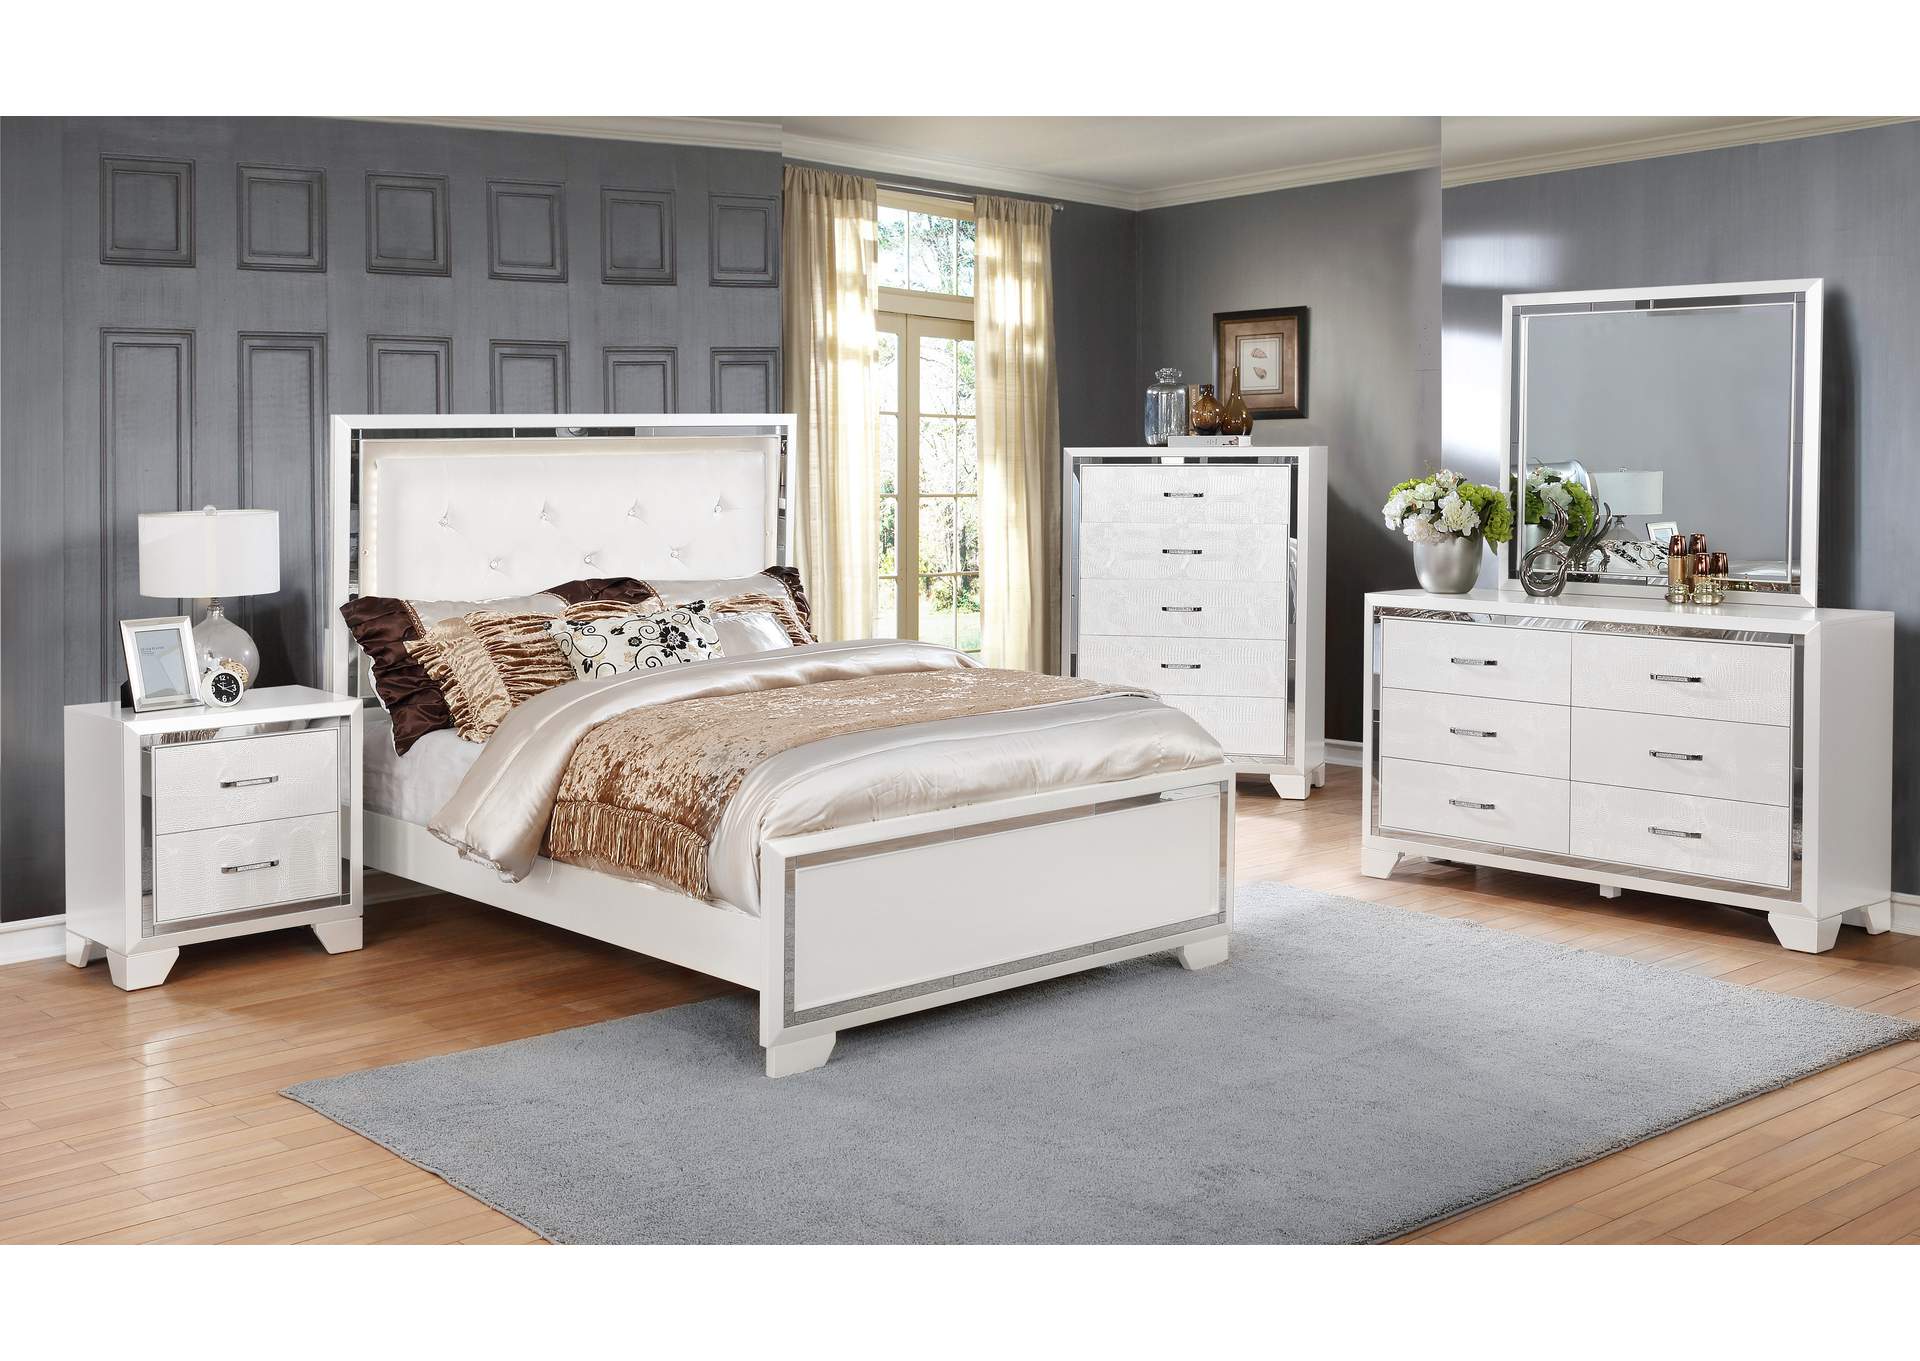 B591 5 Piece White Queen Bedroom Set Q - D - M - N - C,Global Trading